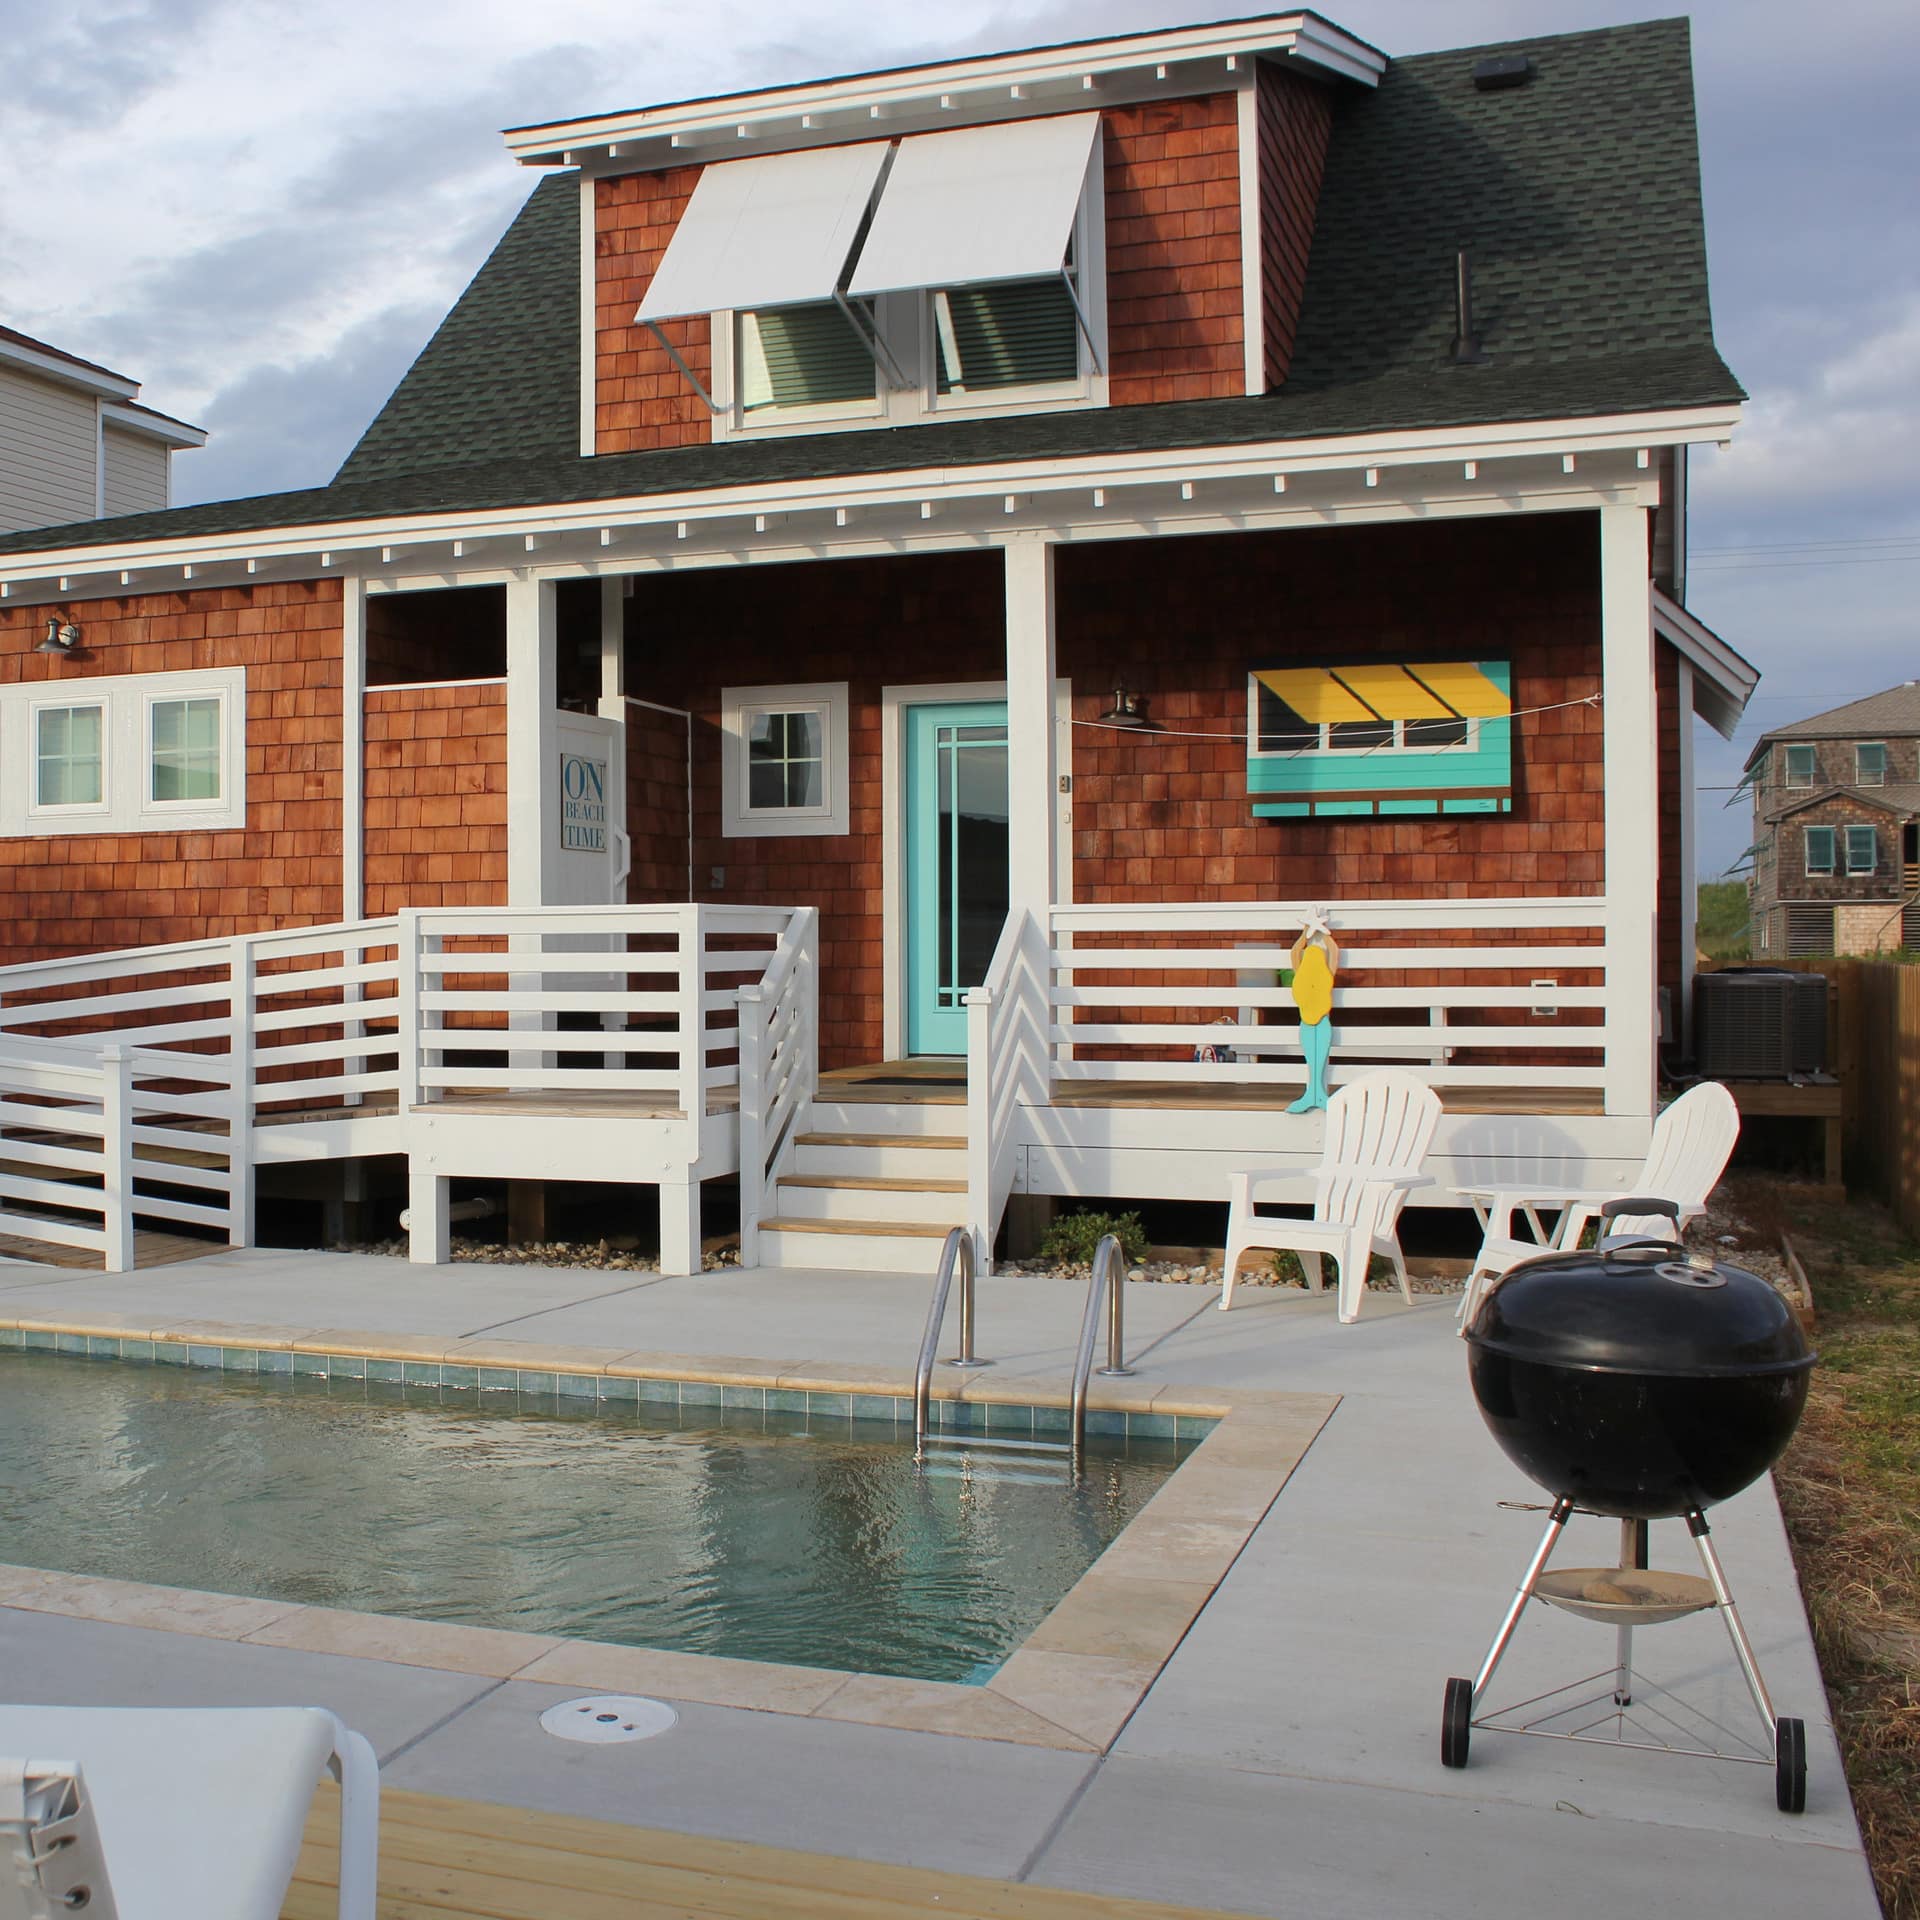 A small cottage with a compact pool and BBQ grill